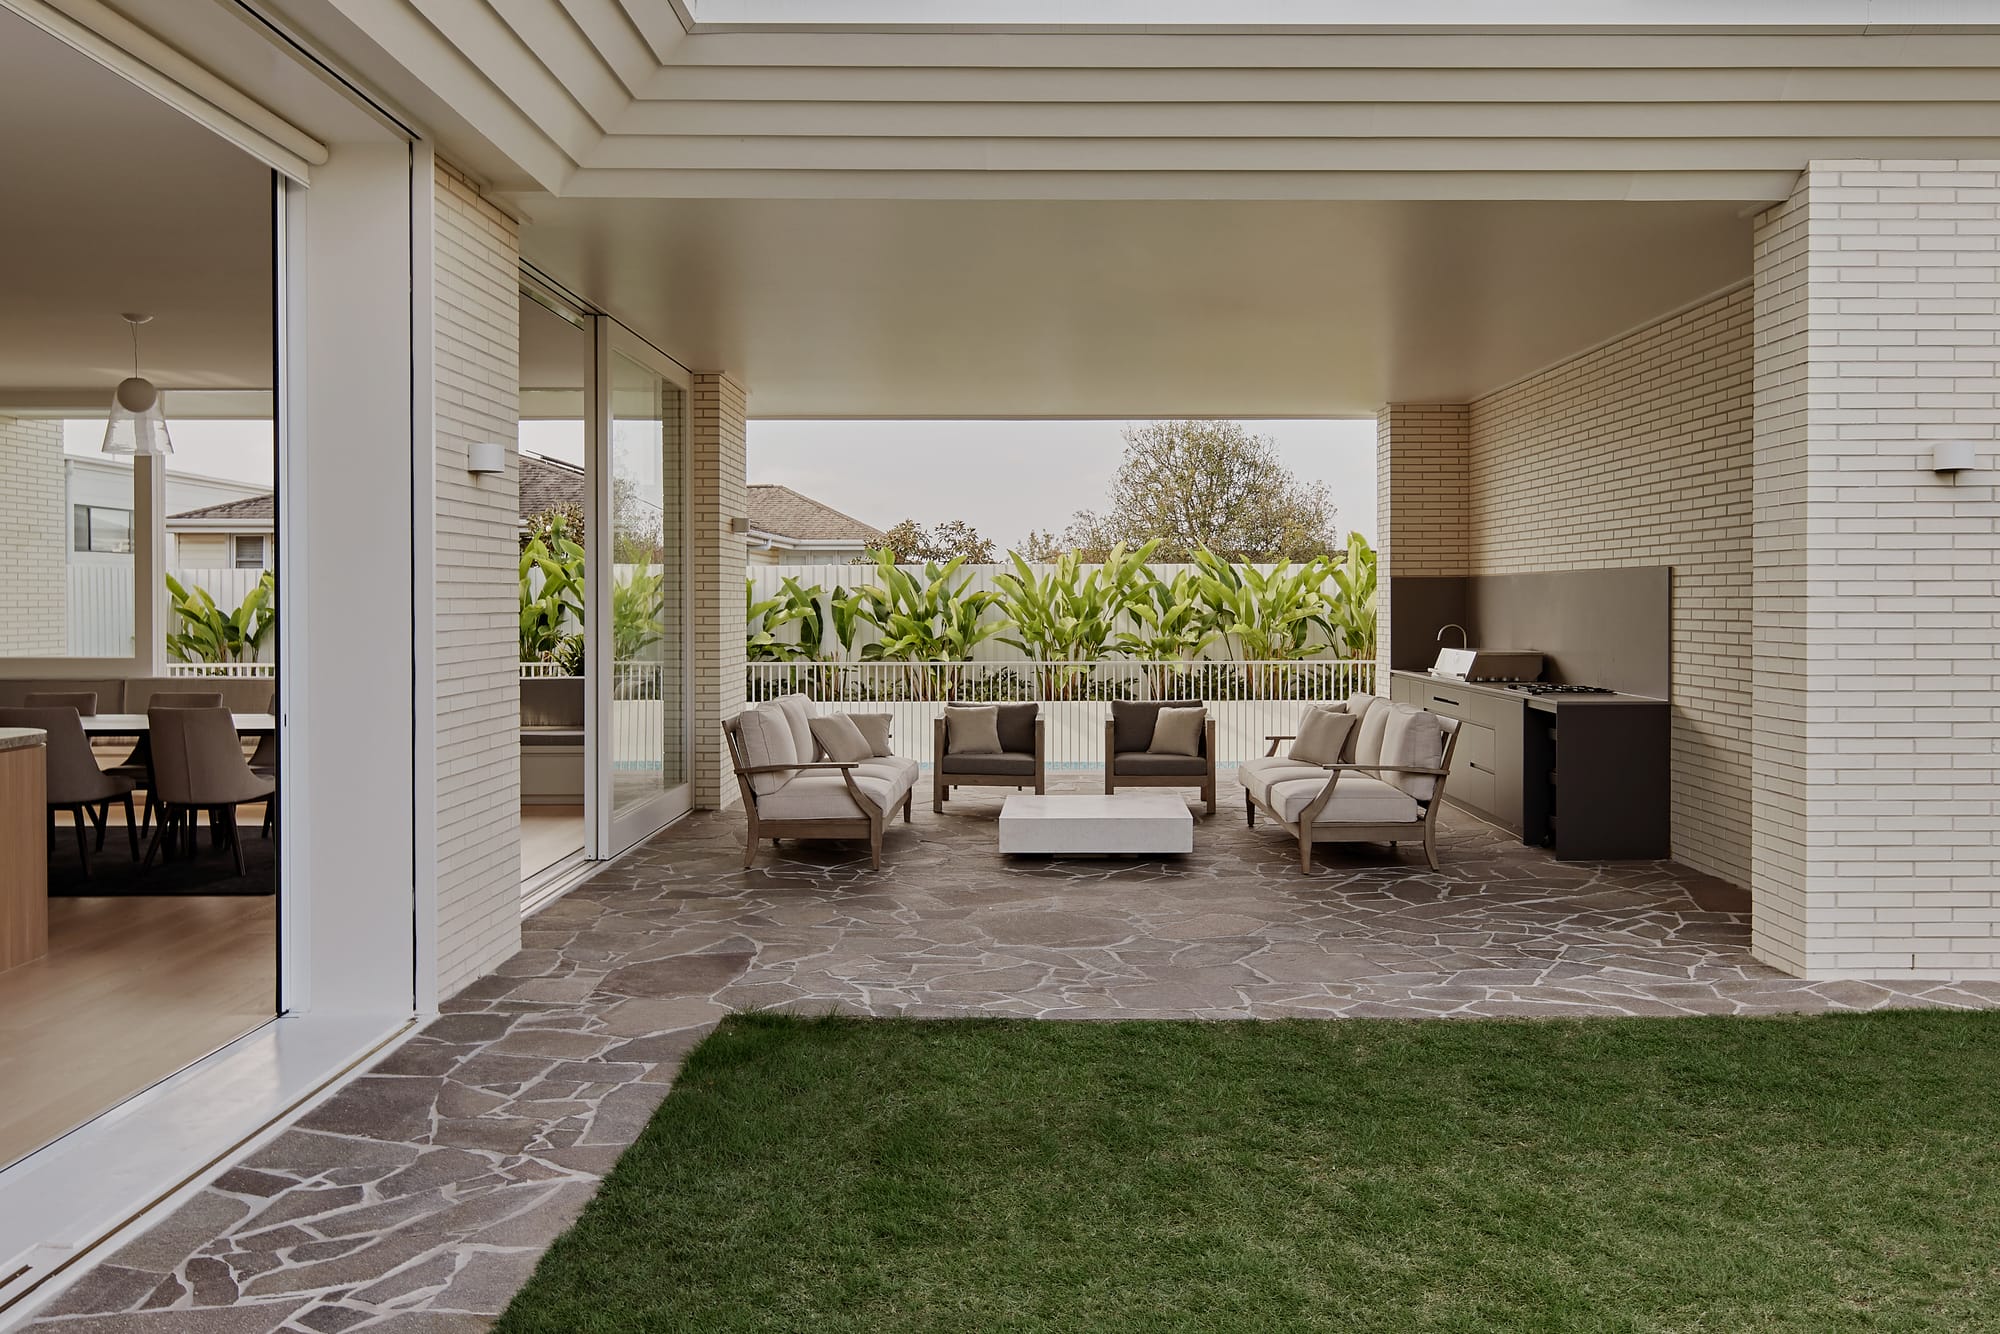 Hill Courtyard House by Kelder Architects. Photography by Brock Beazley Photography. Undercover patio with white brick walls, white-framed sliding doors and stone pavers. White outdoor furniture arranged around white coffee table. 